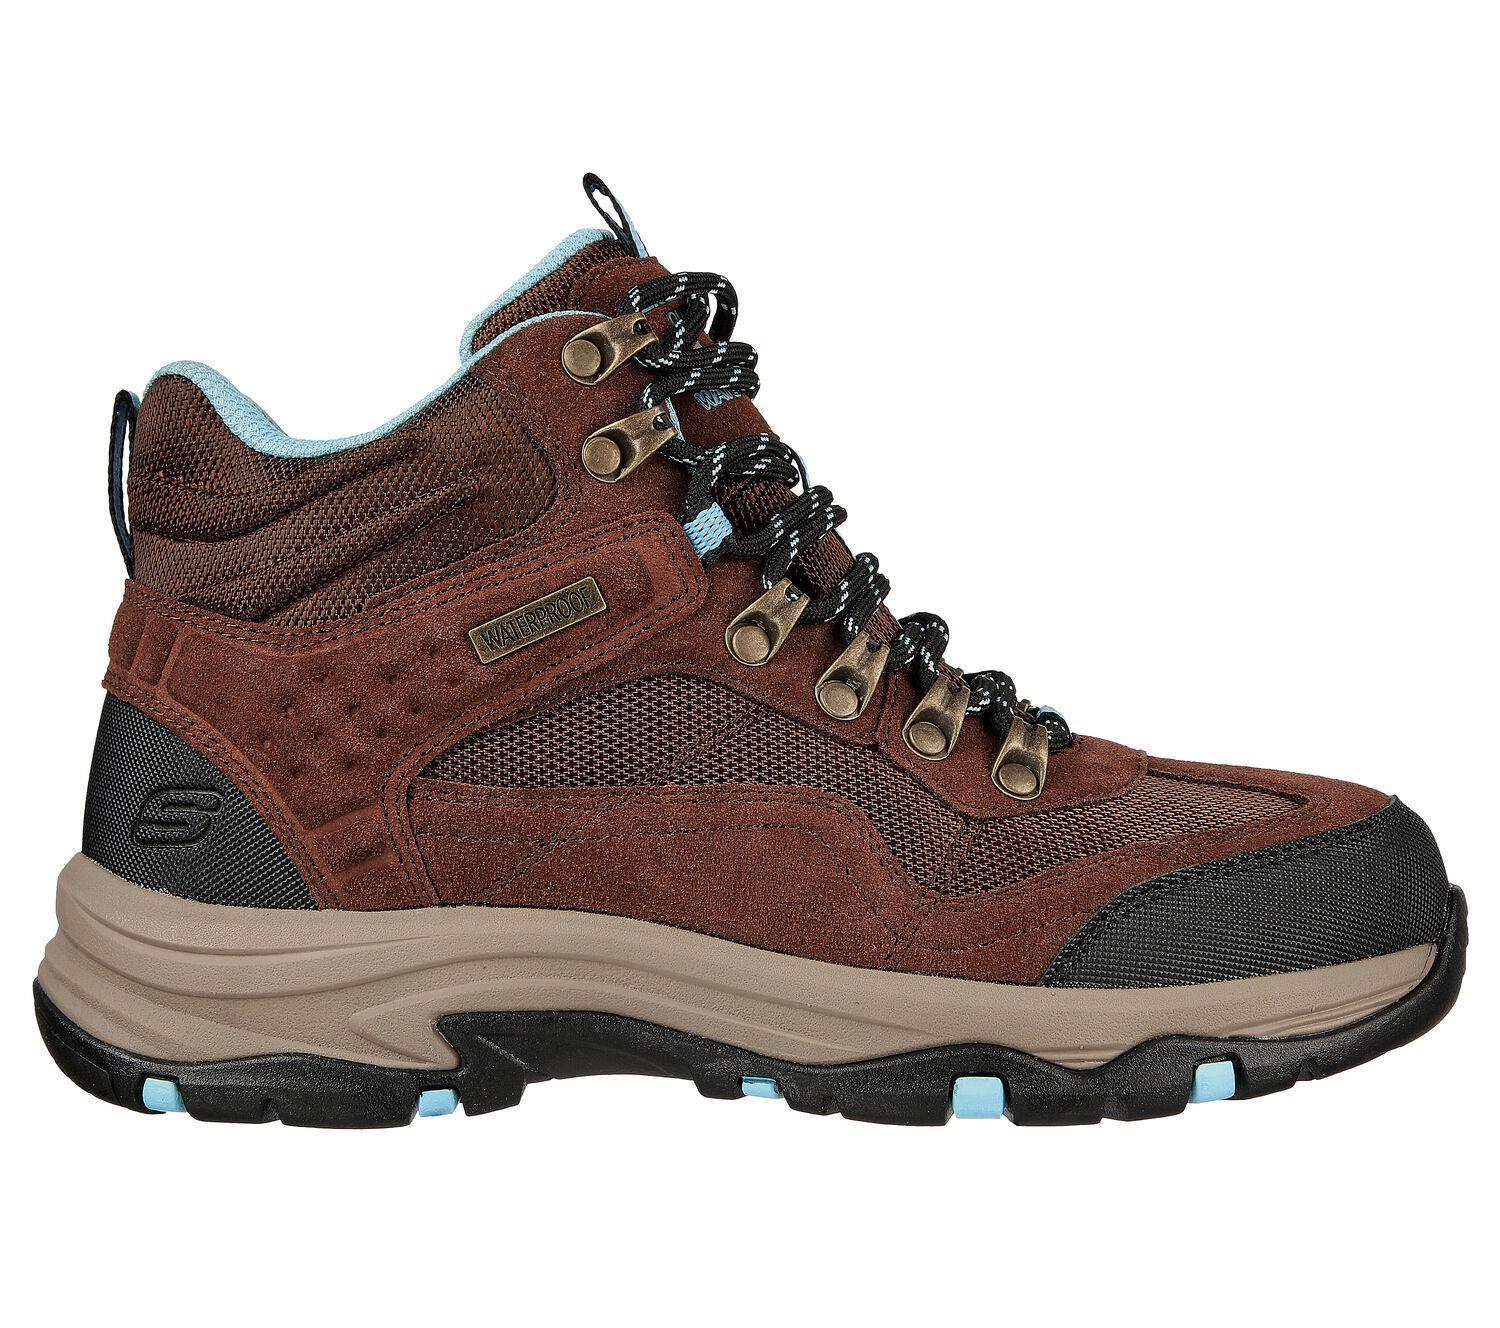 Skechers Rubber 's Wide Fit 167008 Trego Base Camp Waterproof Hiking Boots  in Chocolate (Brown) | Lyst